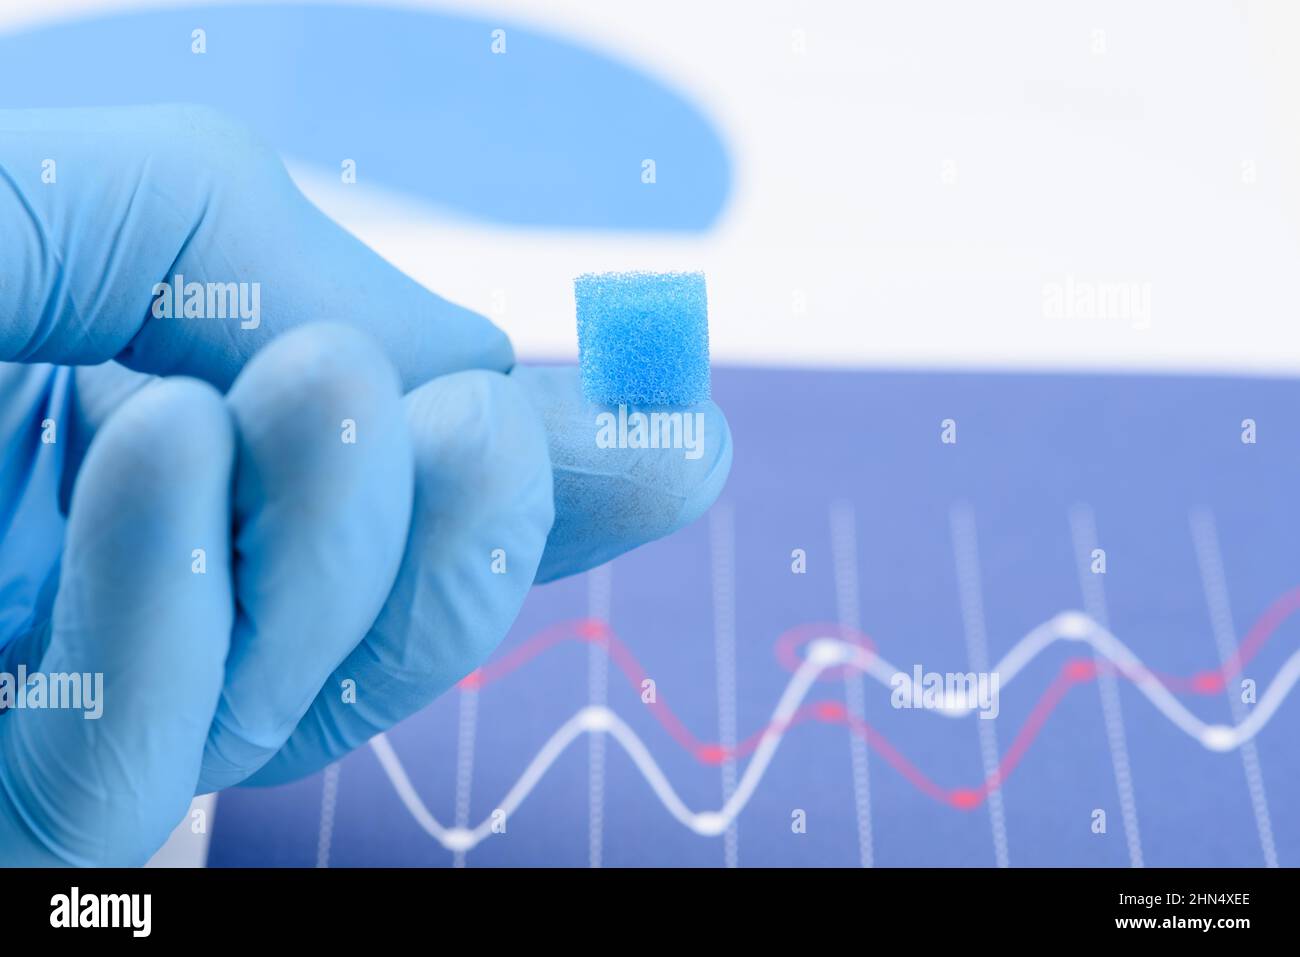 https://c8.alamy.com/comp/2HN4XEE/light-porous-foam-sponge-material-on-scientist-fingertip-research-for-material-with-new-properties-concept-2HN4XEE.jpg